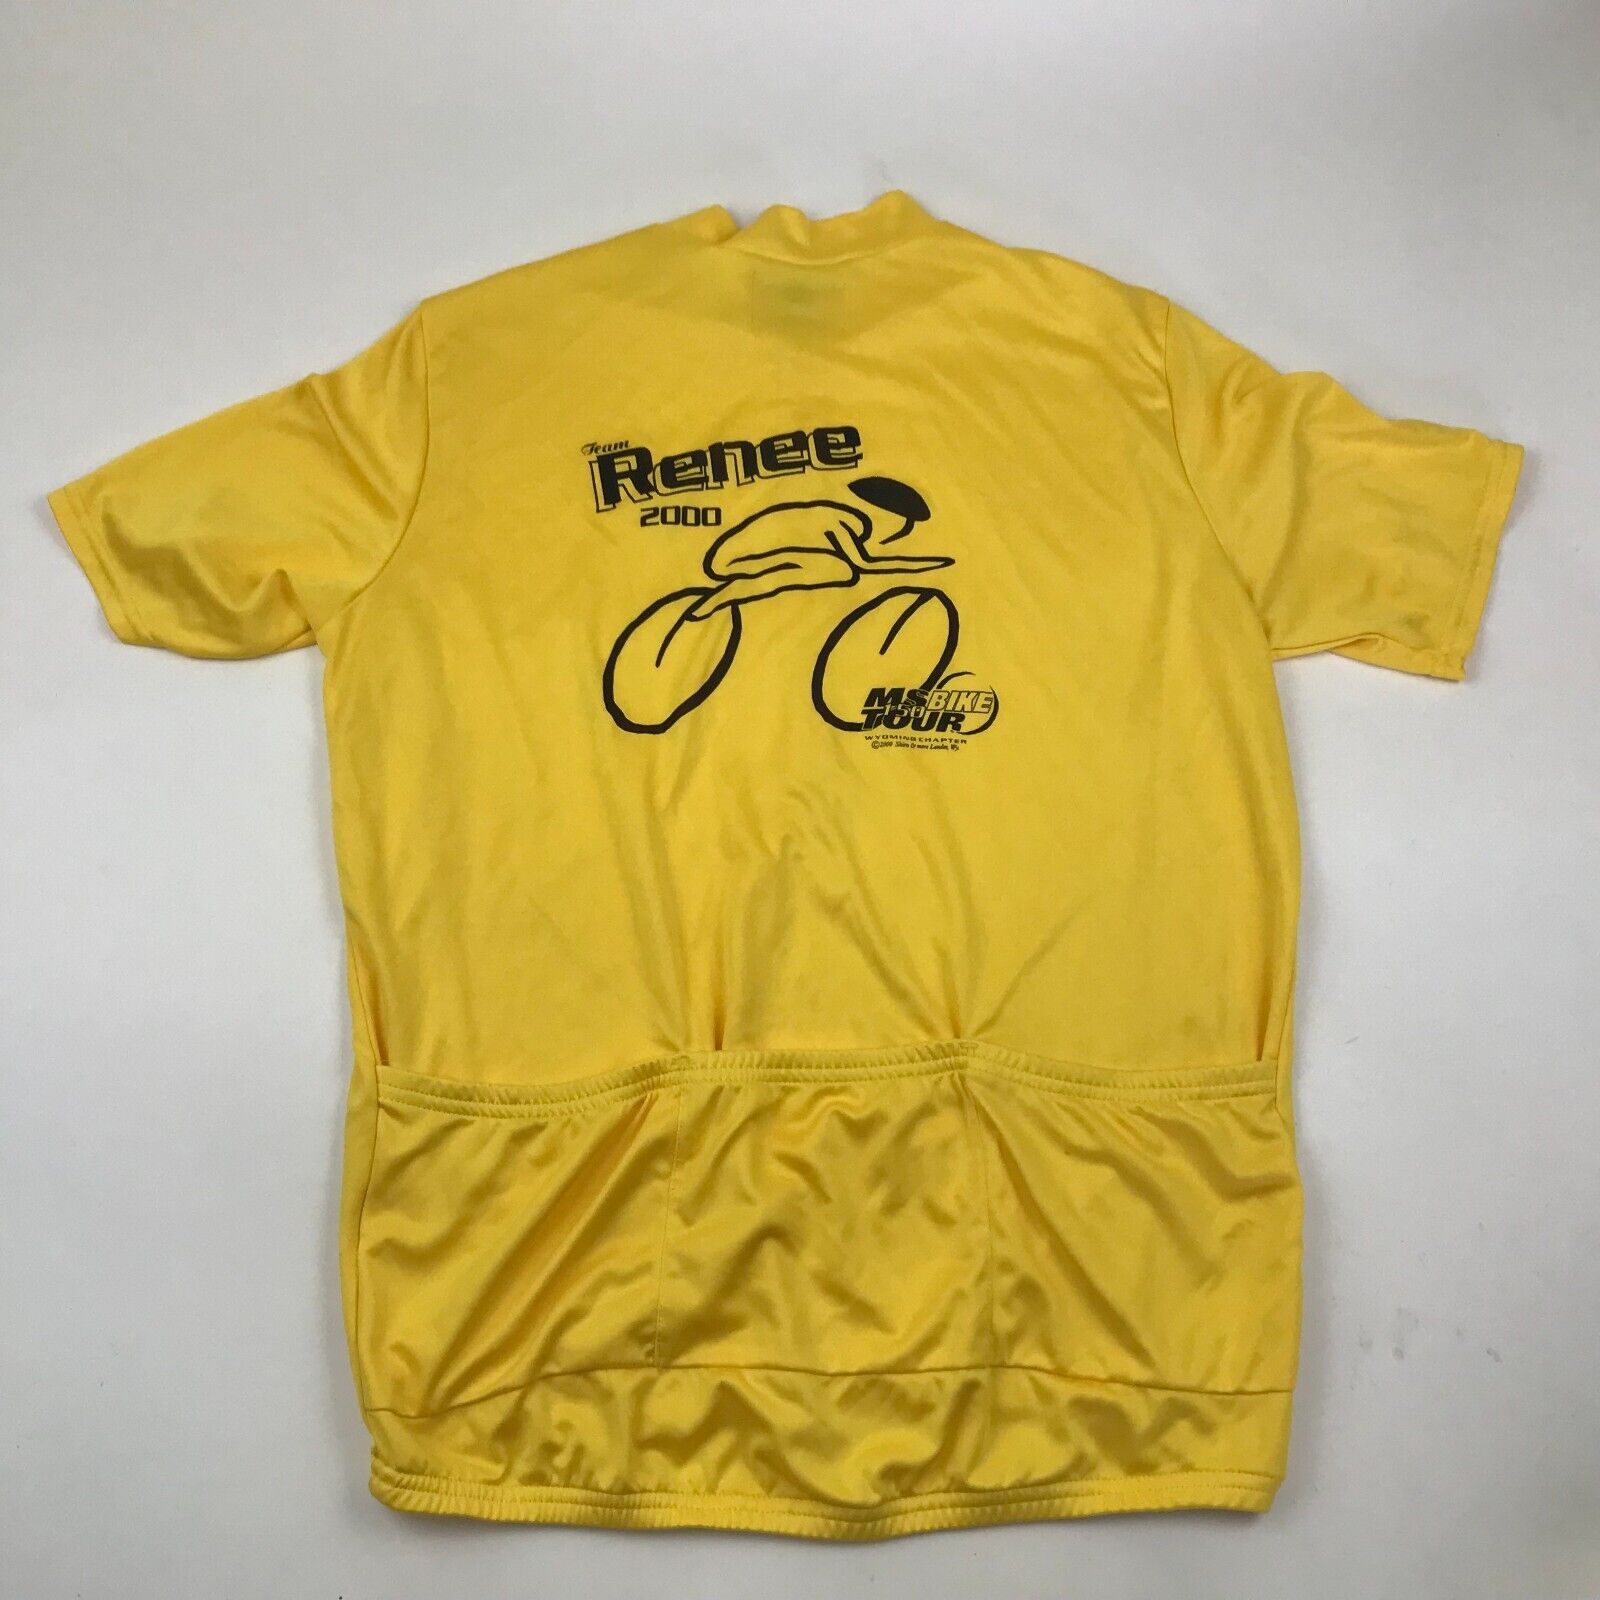 VINTAGE Performance Cycle Jersey Size Large L Yellow Shirt 1/2 Zip Short Sleeve